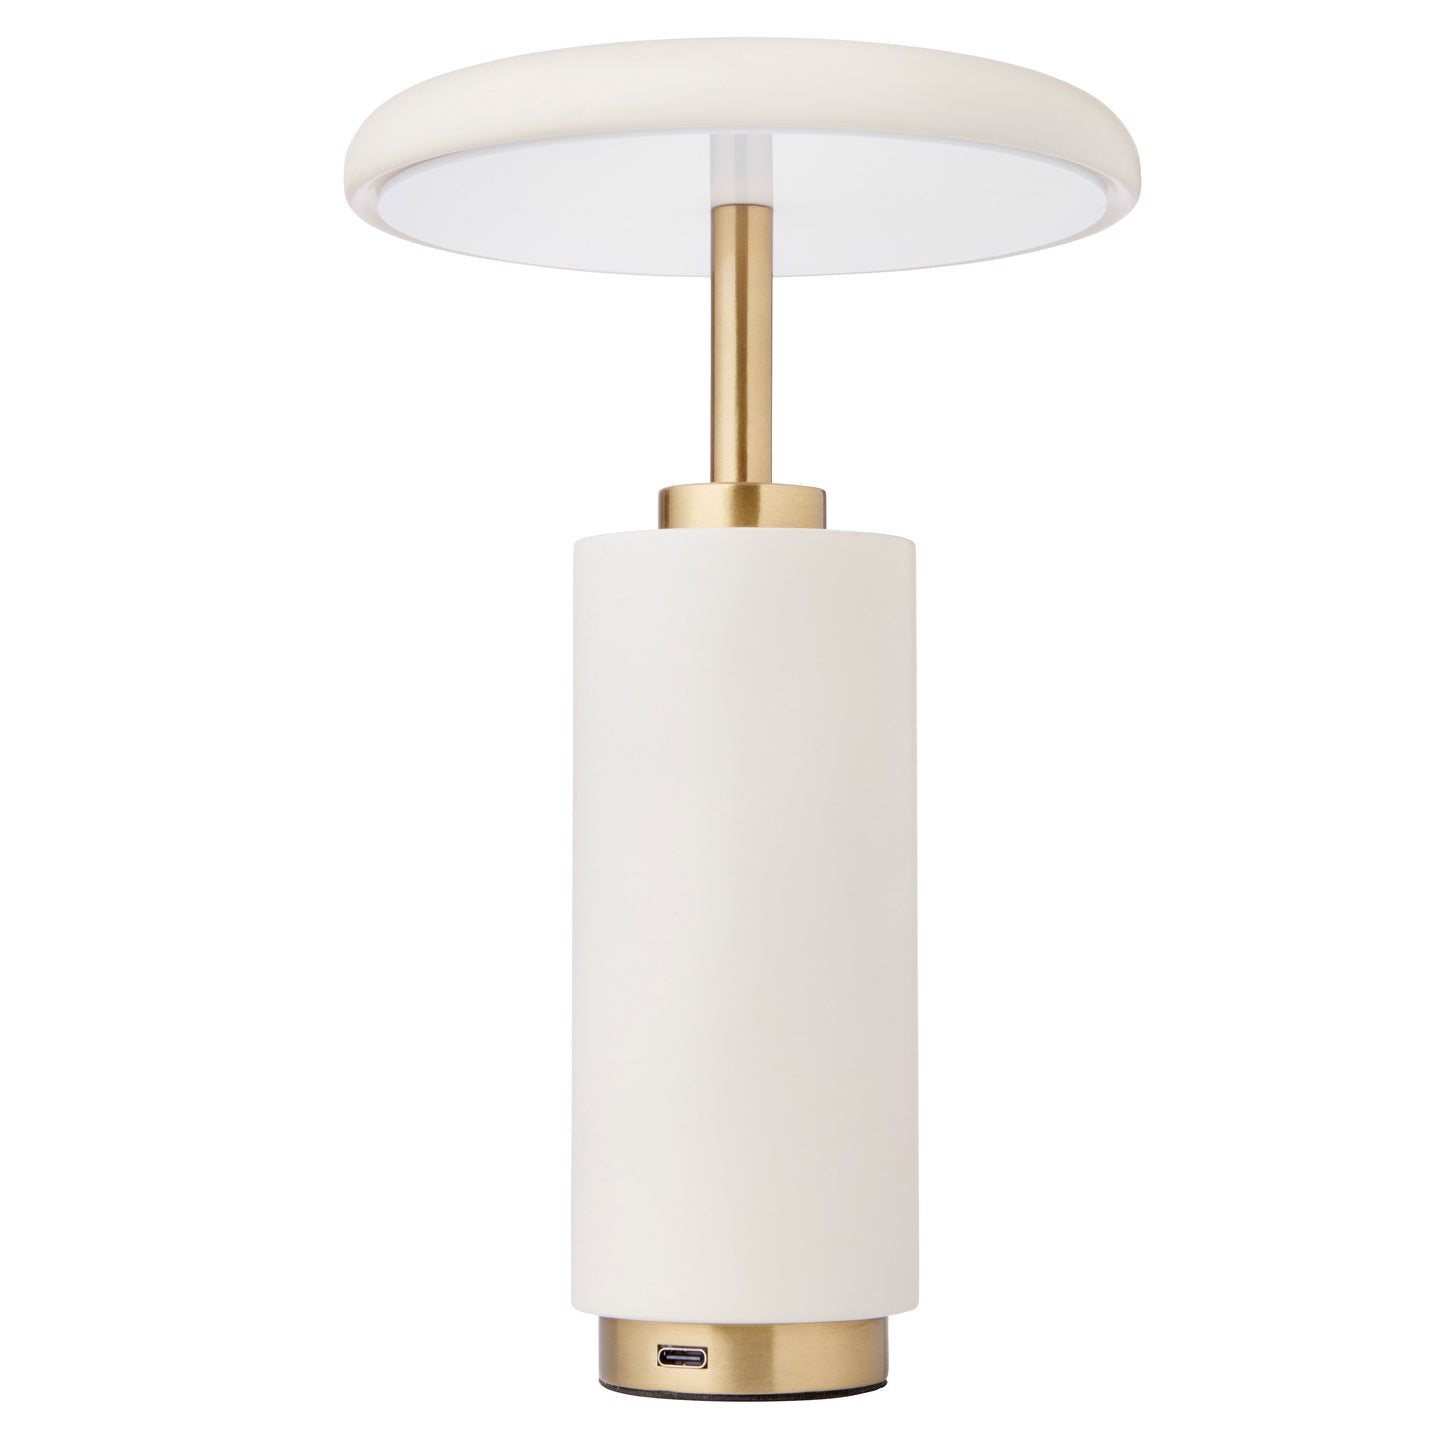 Cozy Living Cassias rechargeable LED lamp - IVORY